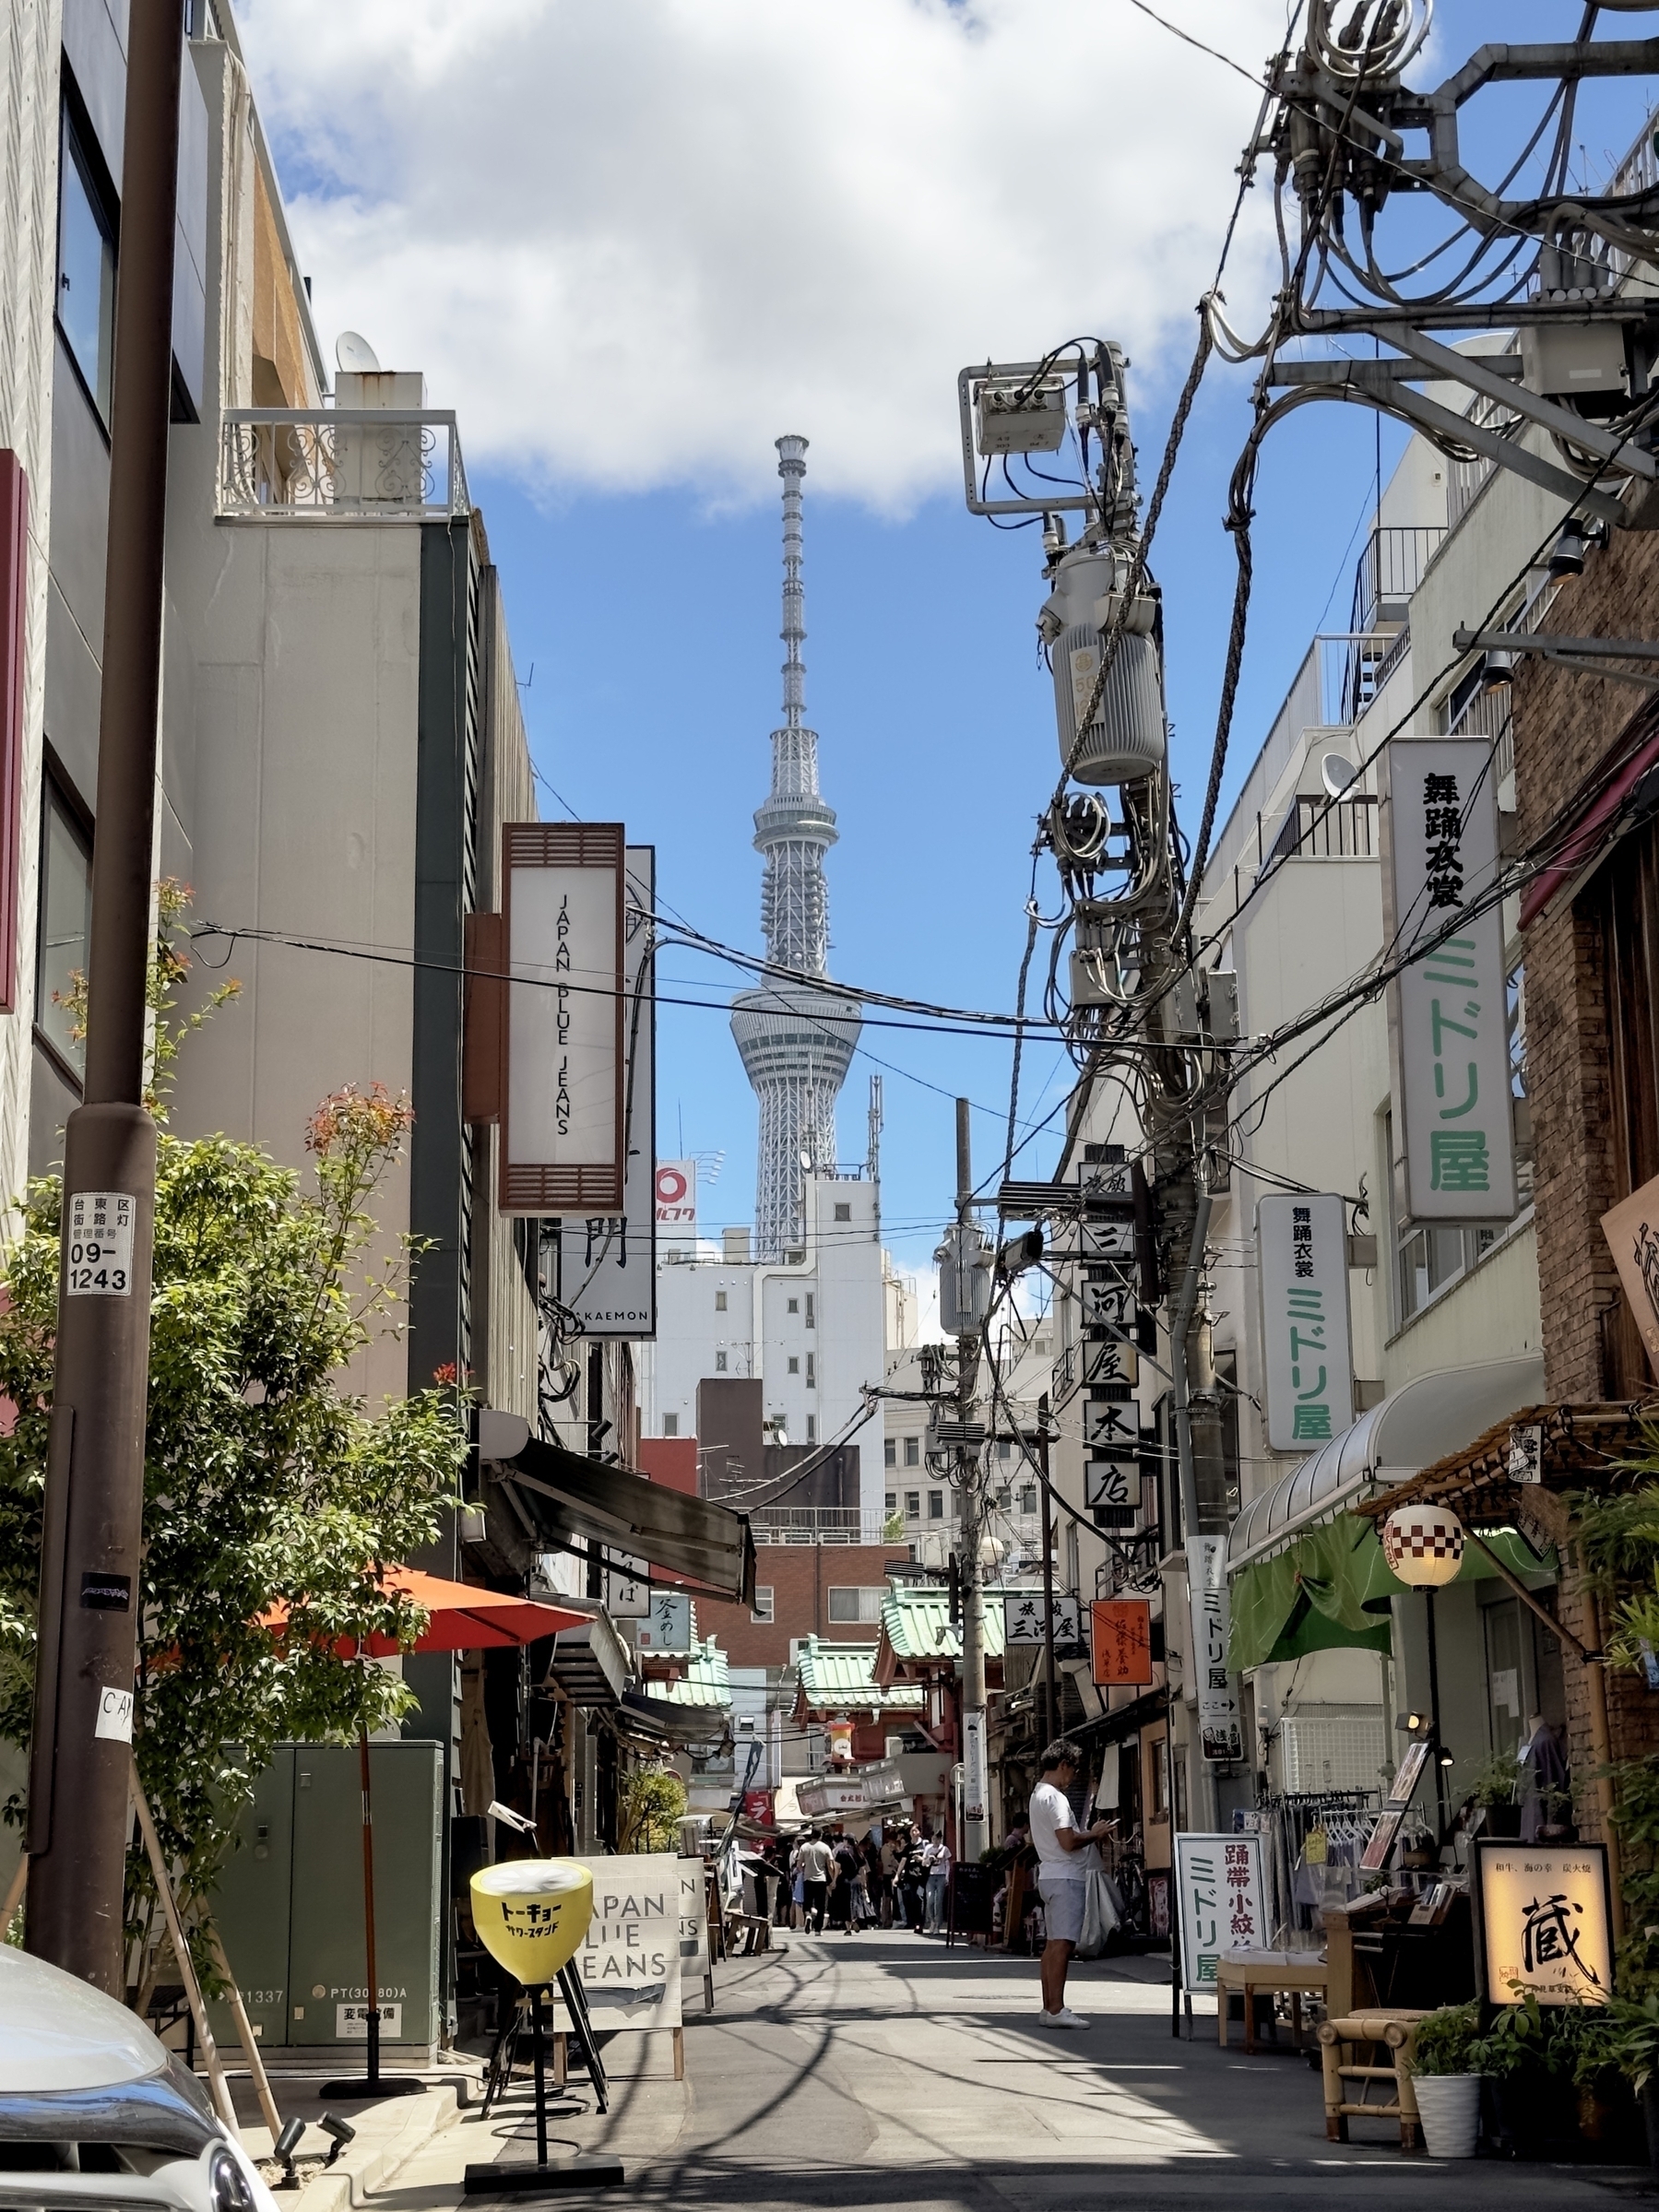 A Tokyo street with an abundance of power csbles agains buildings old and new. The Tokyo skytree in the distance